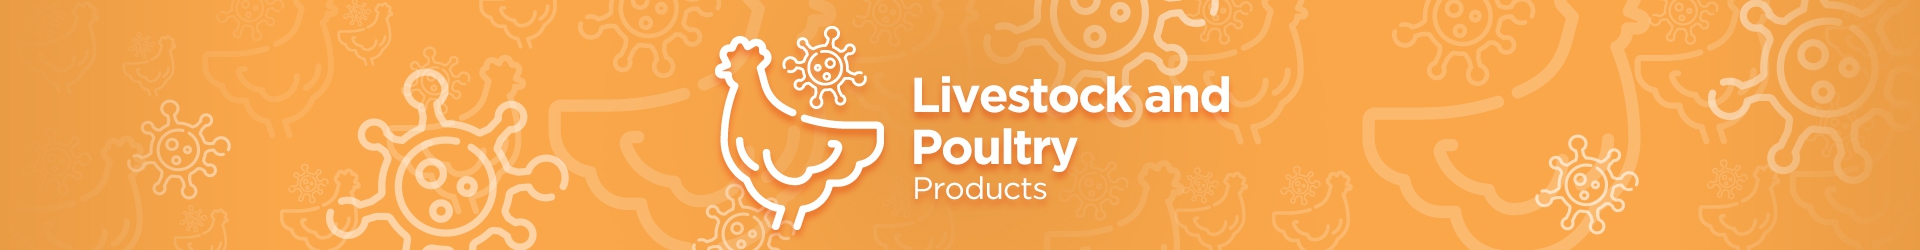 Livestock and Poultry Products Inslider